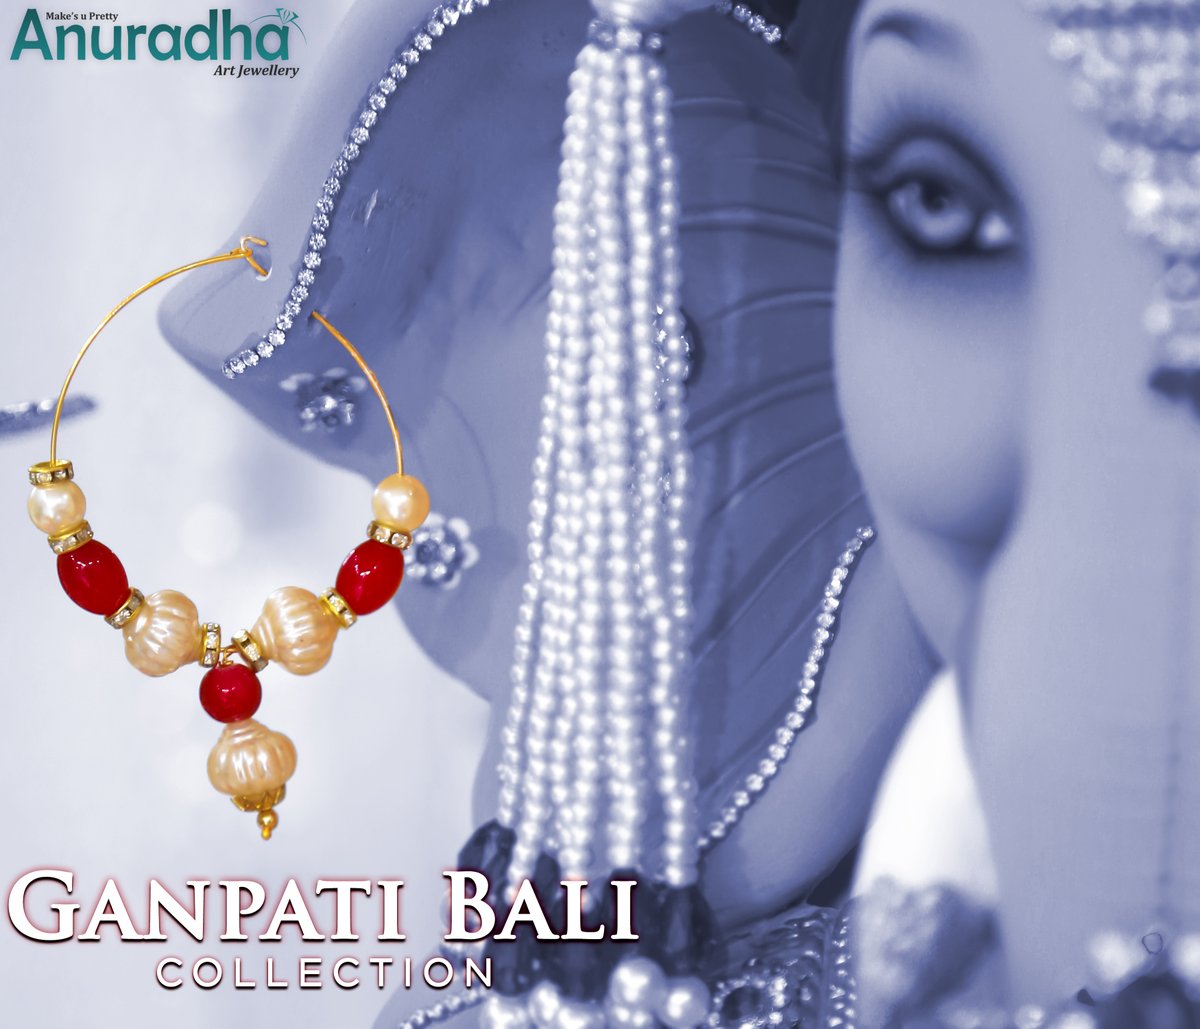 😍Exclusive Collection Of Ganpati Bigbali For Ganpati Decoration 🤩 at the lowest cost by Anuradha Art Jewellery Shop Here: bit.ly/30ZzvR1
-
#ganpati #ganpatijewellery #ganpatidecoration #ganpatifestival #ganpatisajavatjewellery #artificialjewellery #anuradhaartjewellery